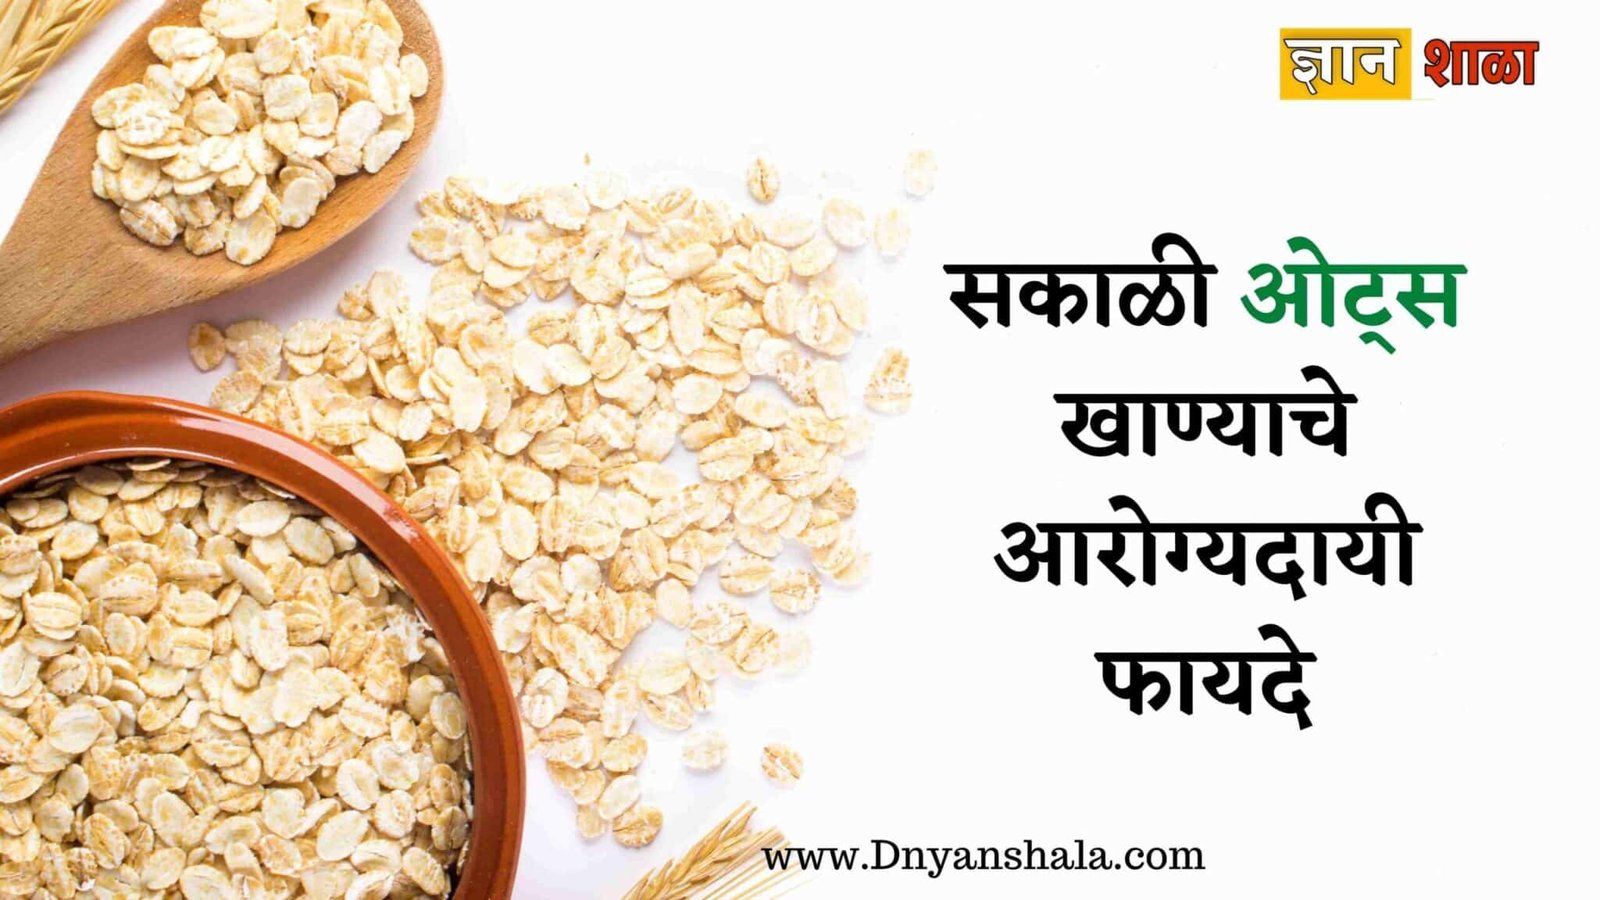 Health benefits of eating oats in the morning